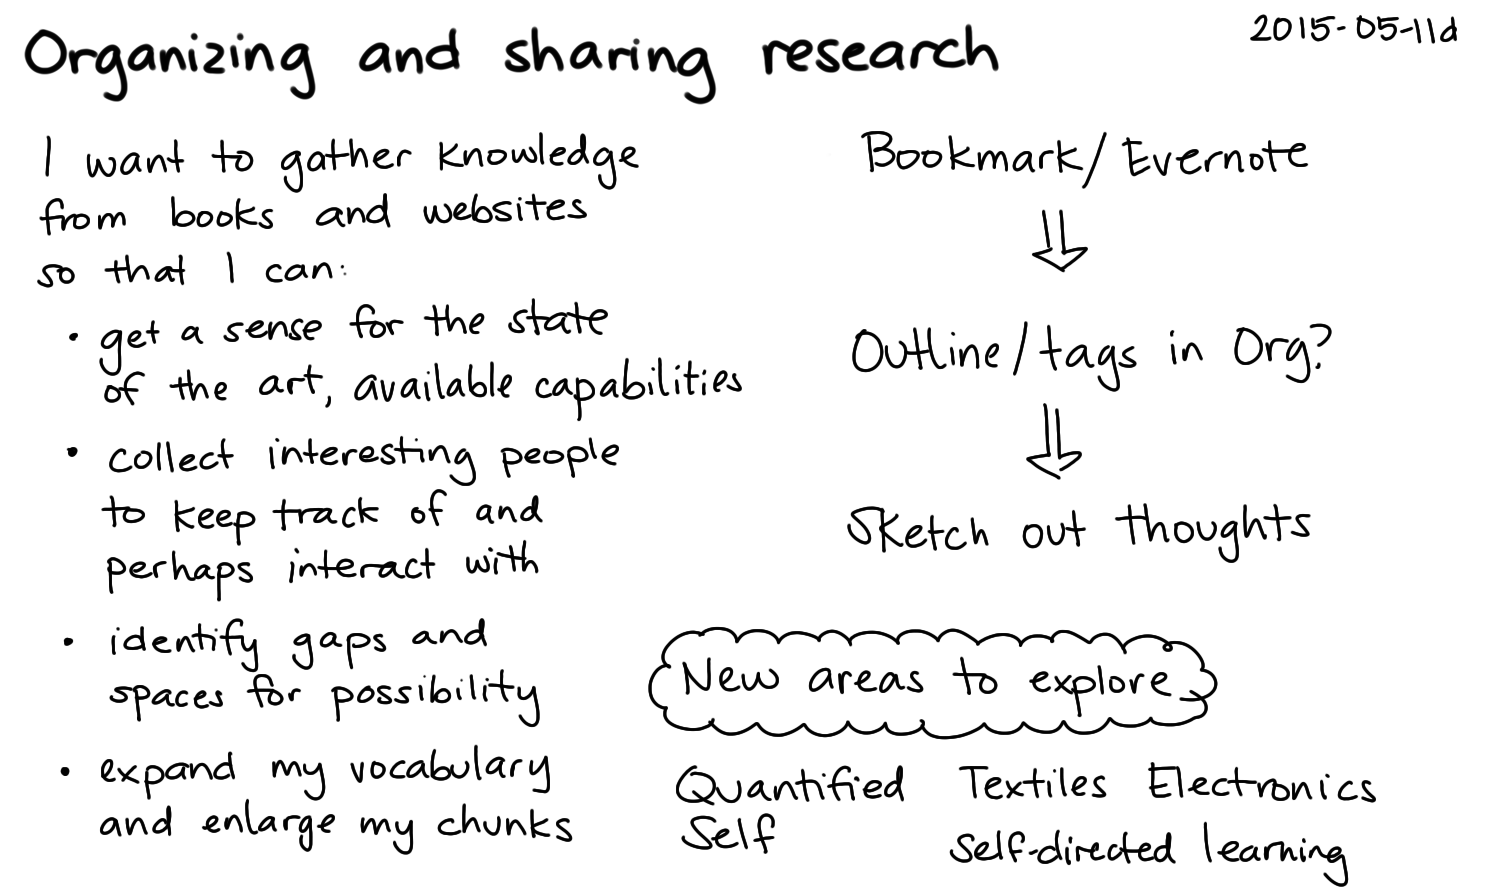 2015-05-11d Organizing and sharing research -- index card #pkm.png